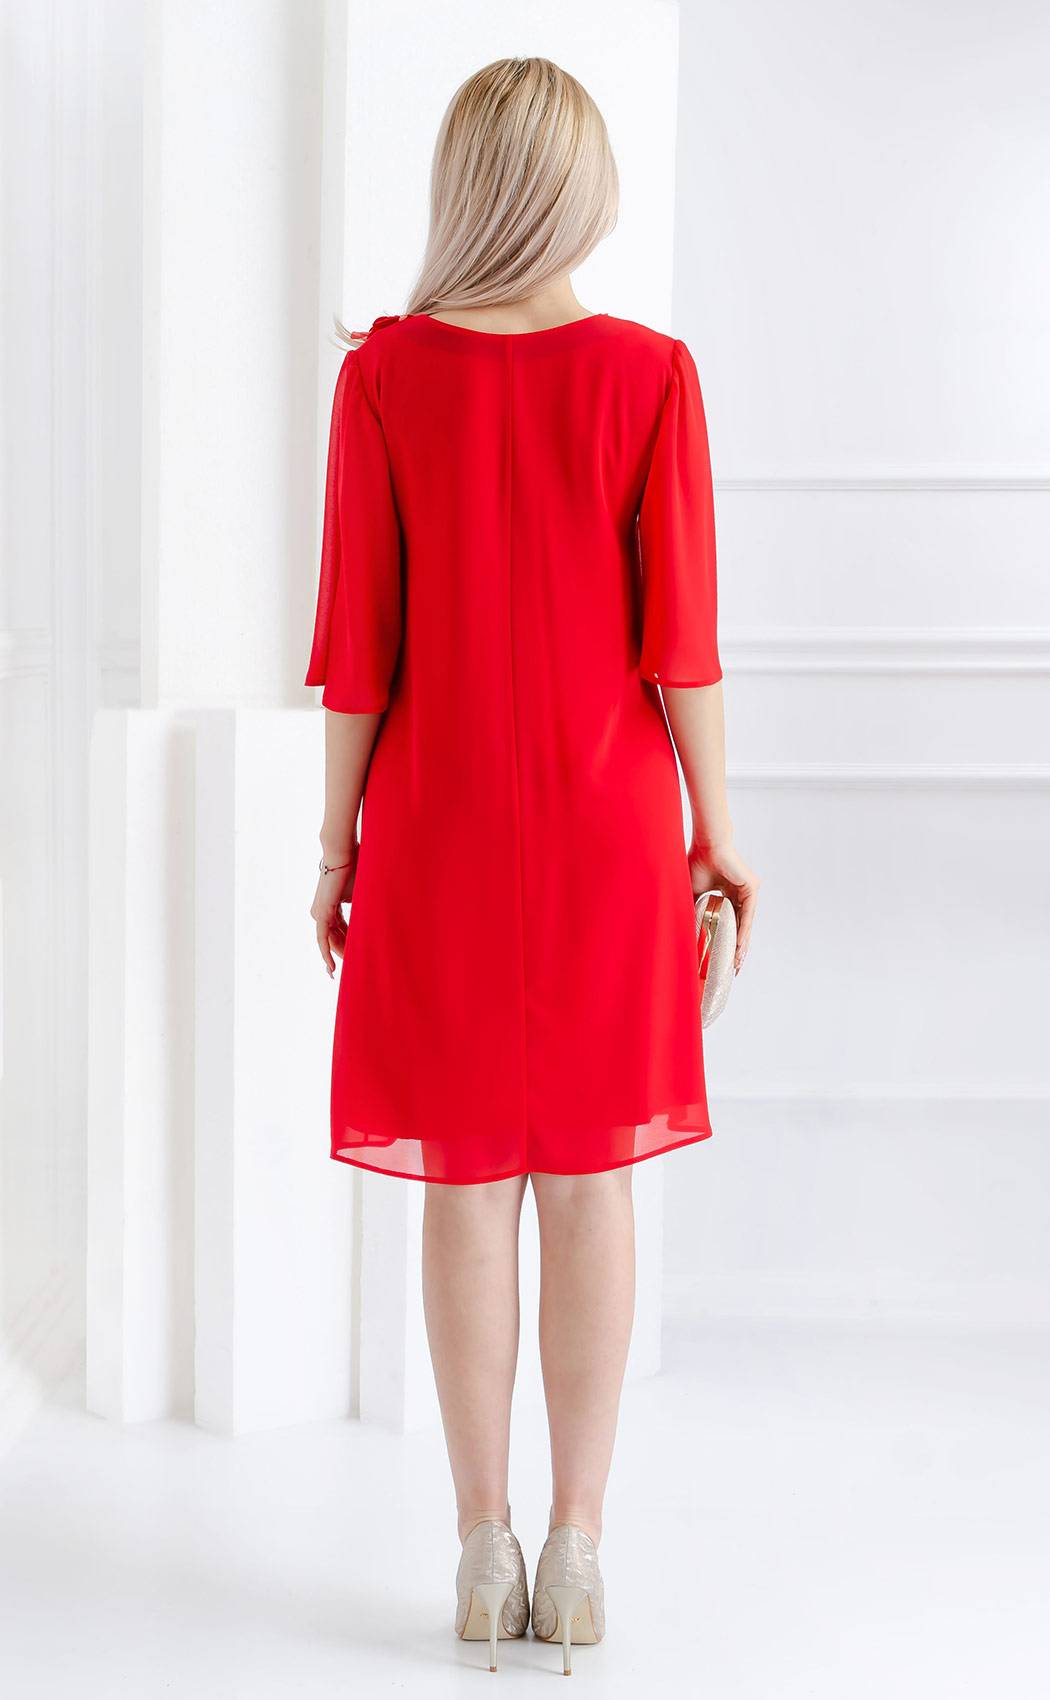 Red dress with 3d lace ⊶ Formal Dresses ᑕ❶ᑐ AROGANS